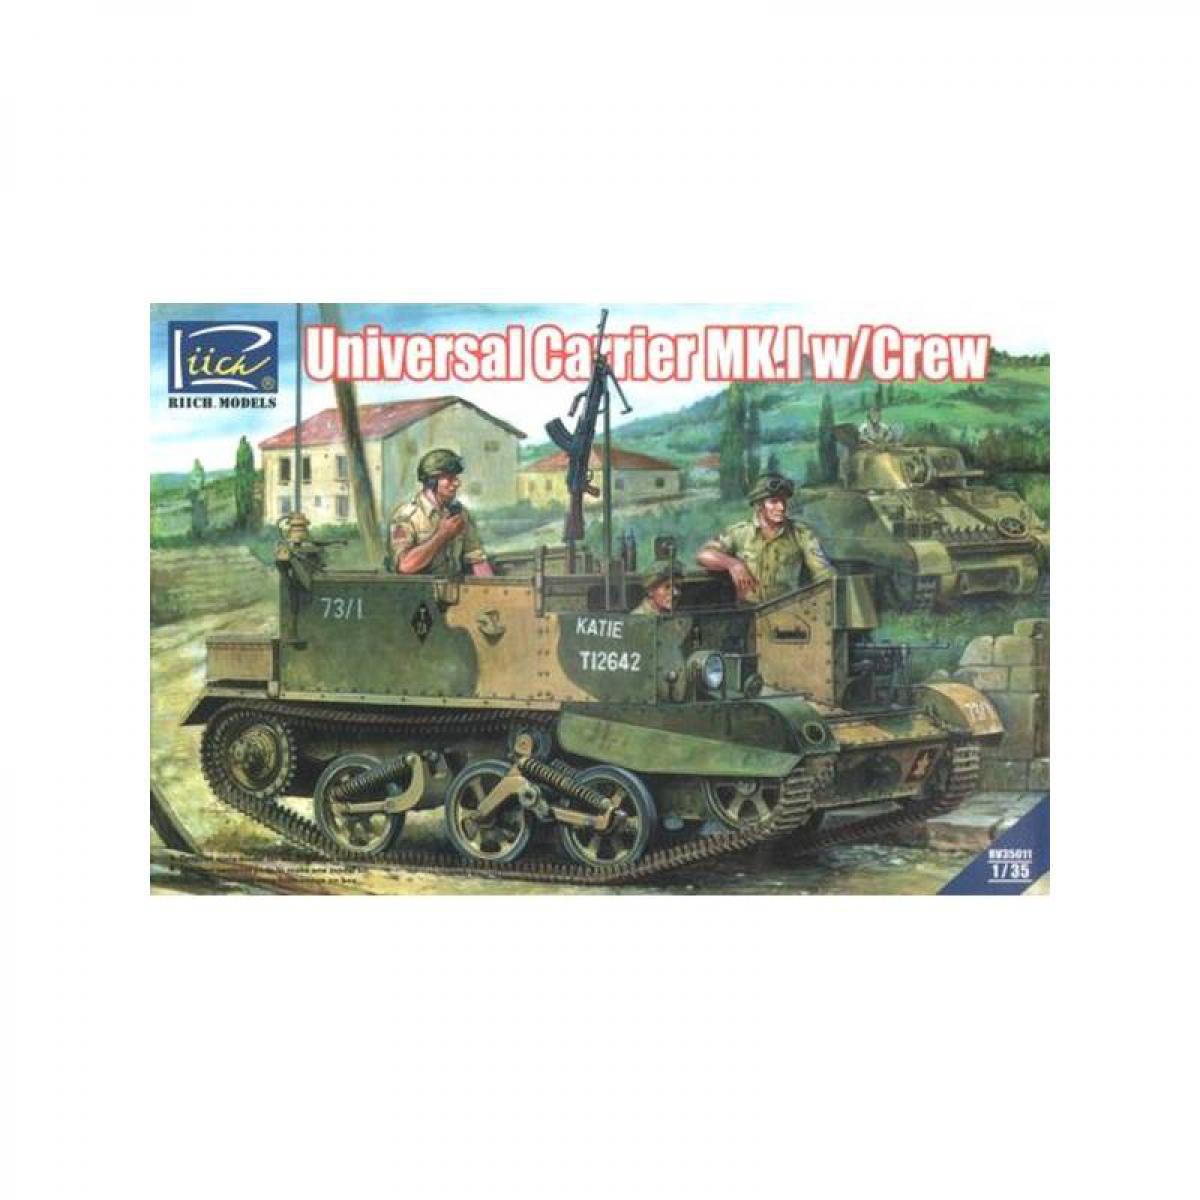 Riich Models - Maquette Véhicule Universal Carrier Mk.1 With Crew - Chars